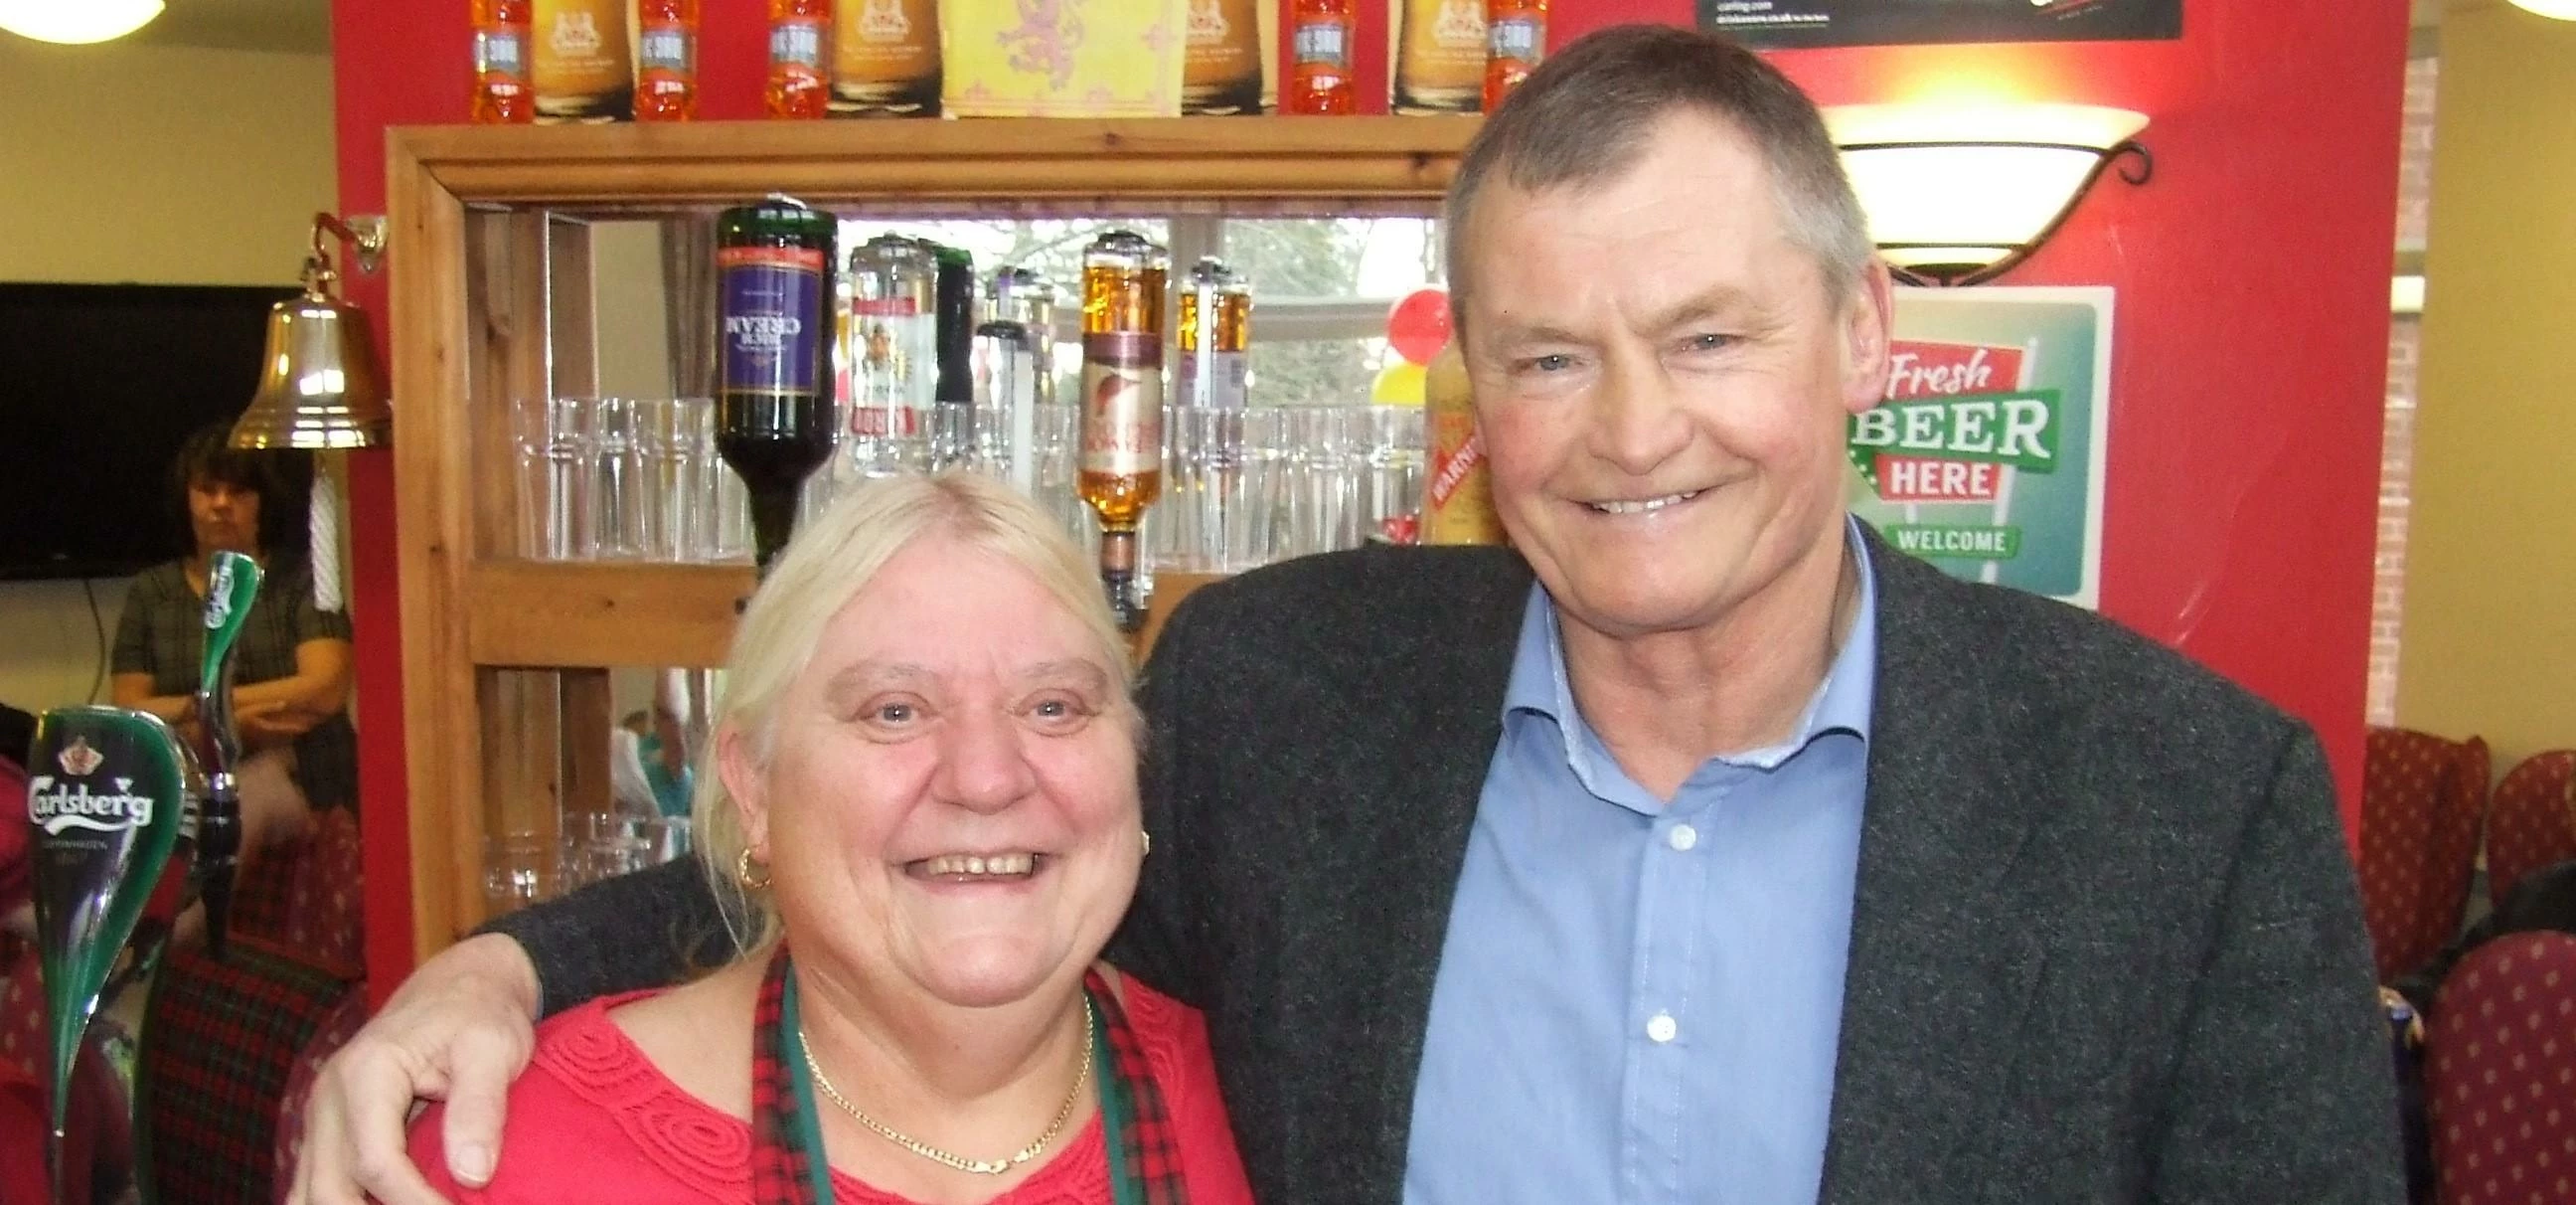 Care home manager Cindy Turner and former England and Hull KR Rugby League player Phil Lowe 